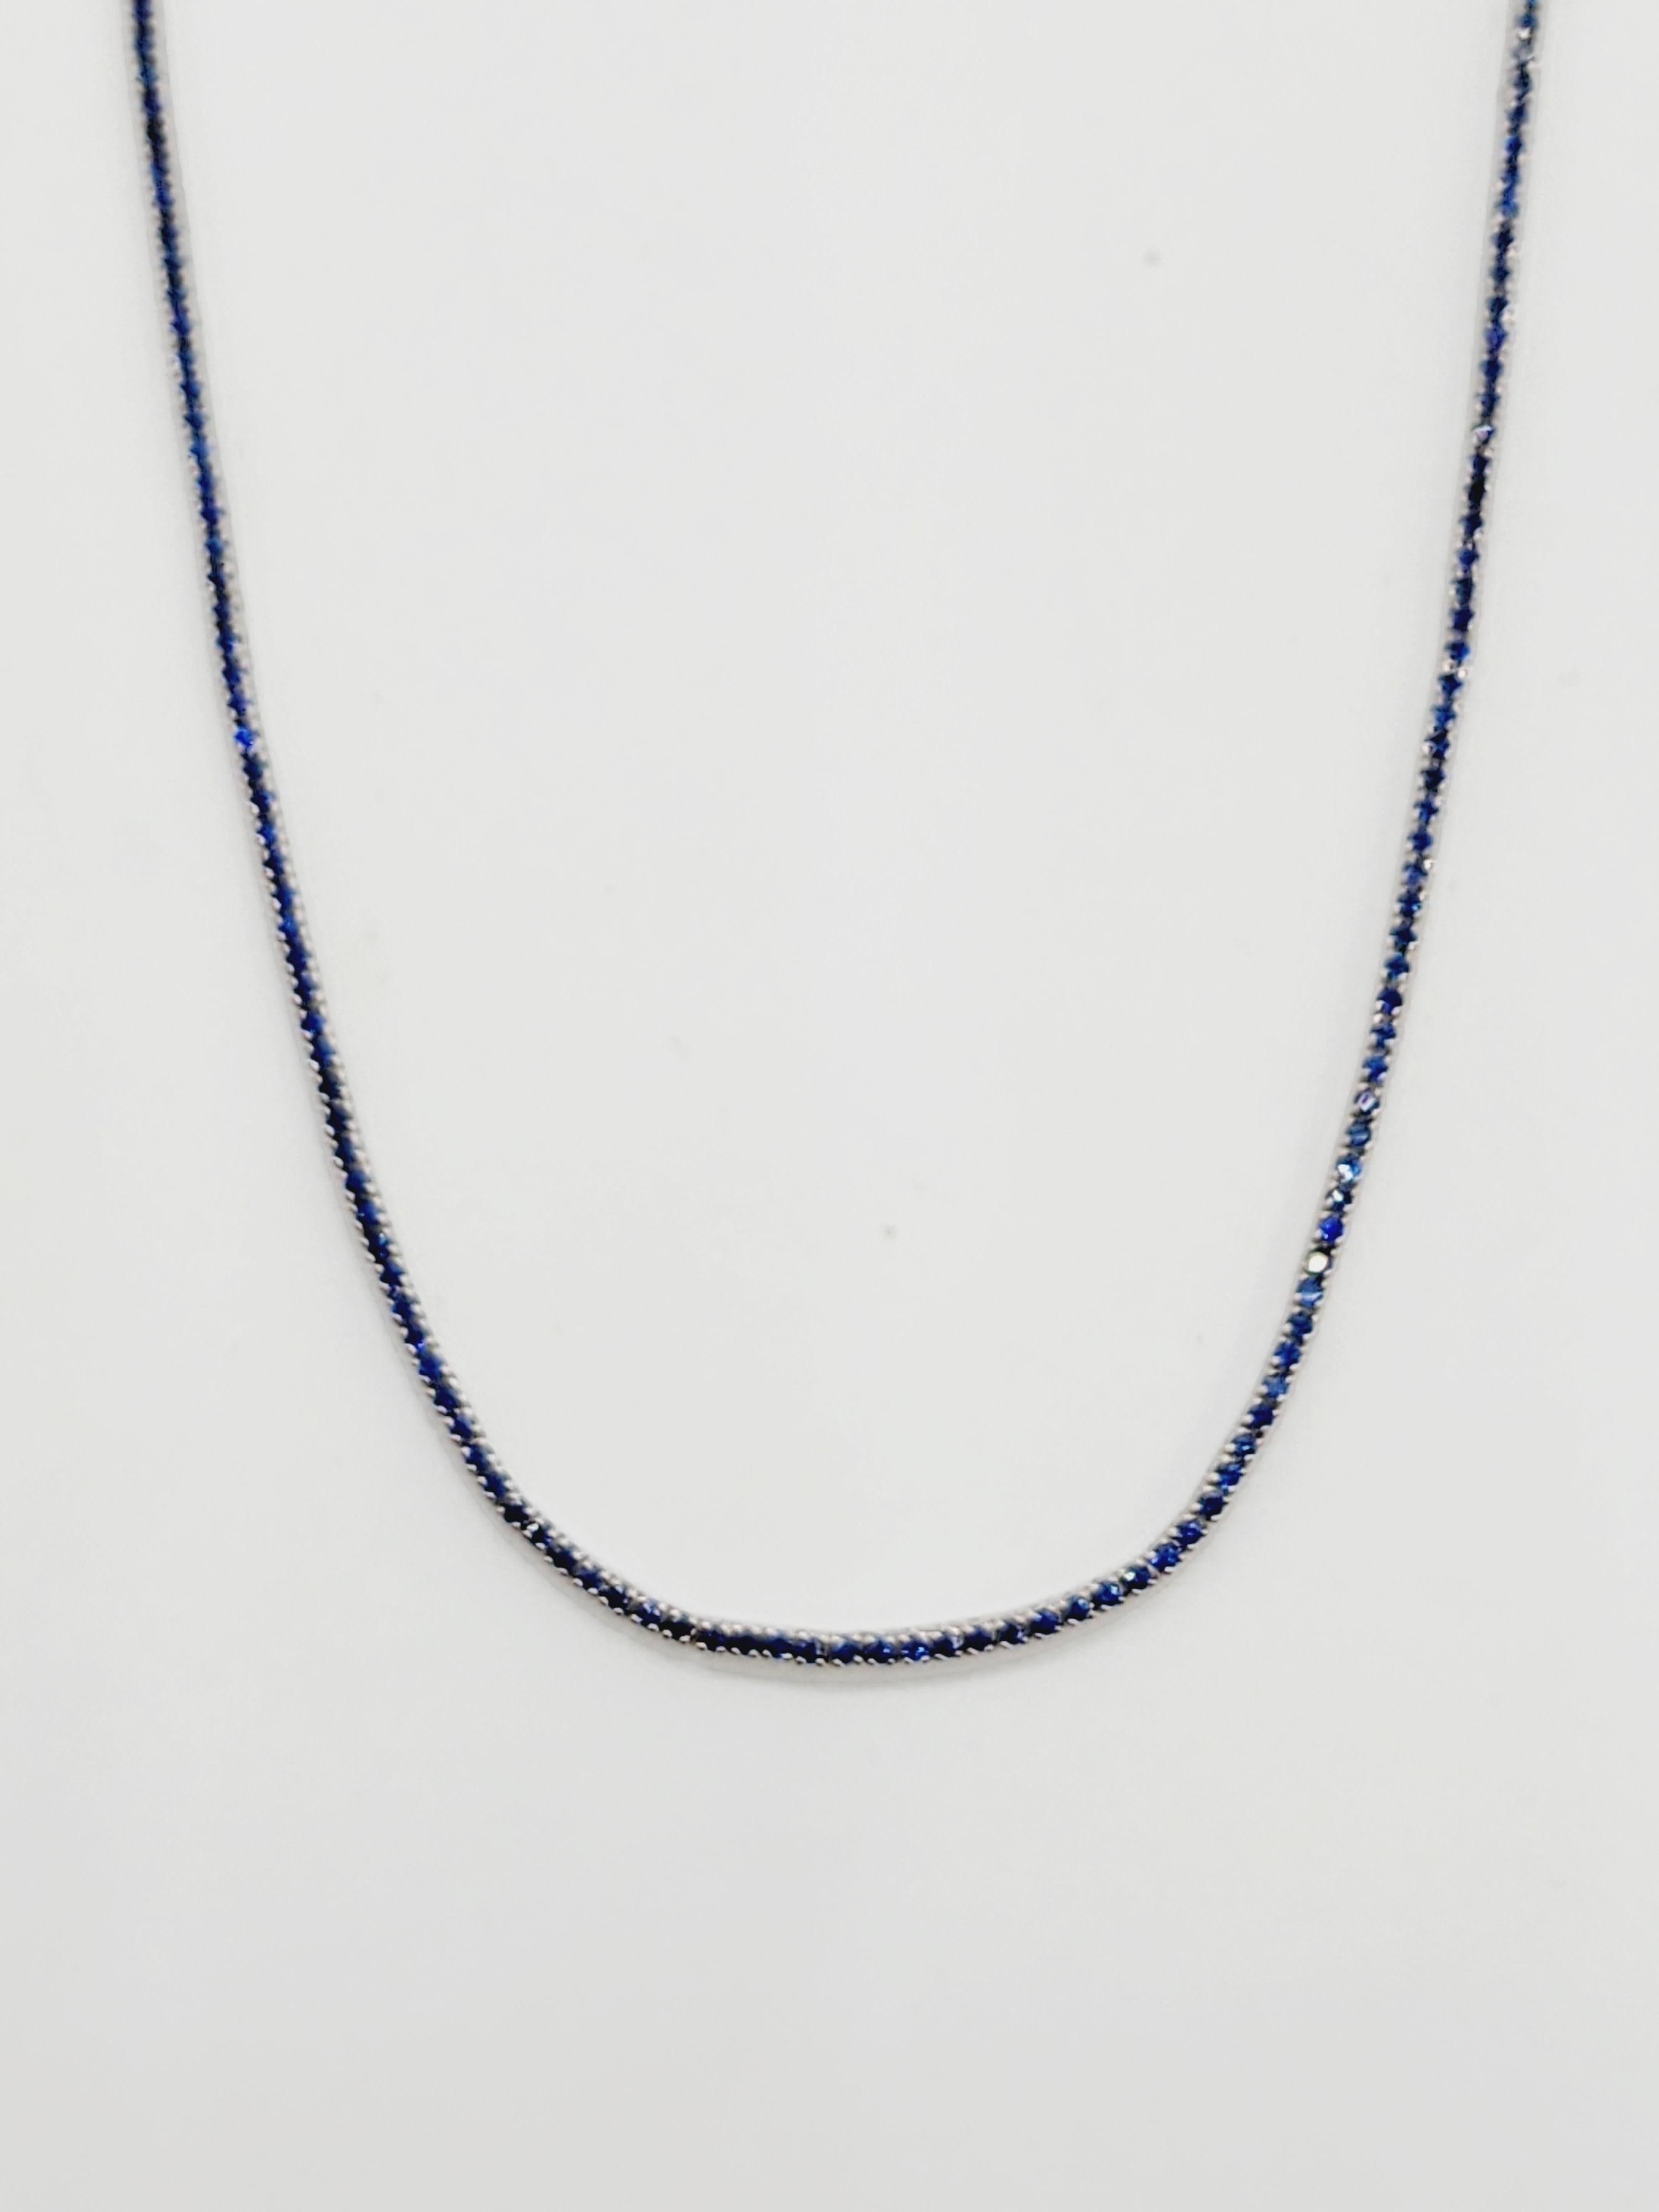 4.75 Carats Sapphire Tennis Necklace 14 Karat White Gold 20'' In New Condition For Sale In Great Neck, NY